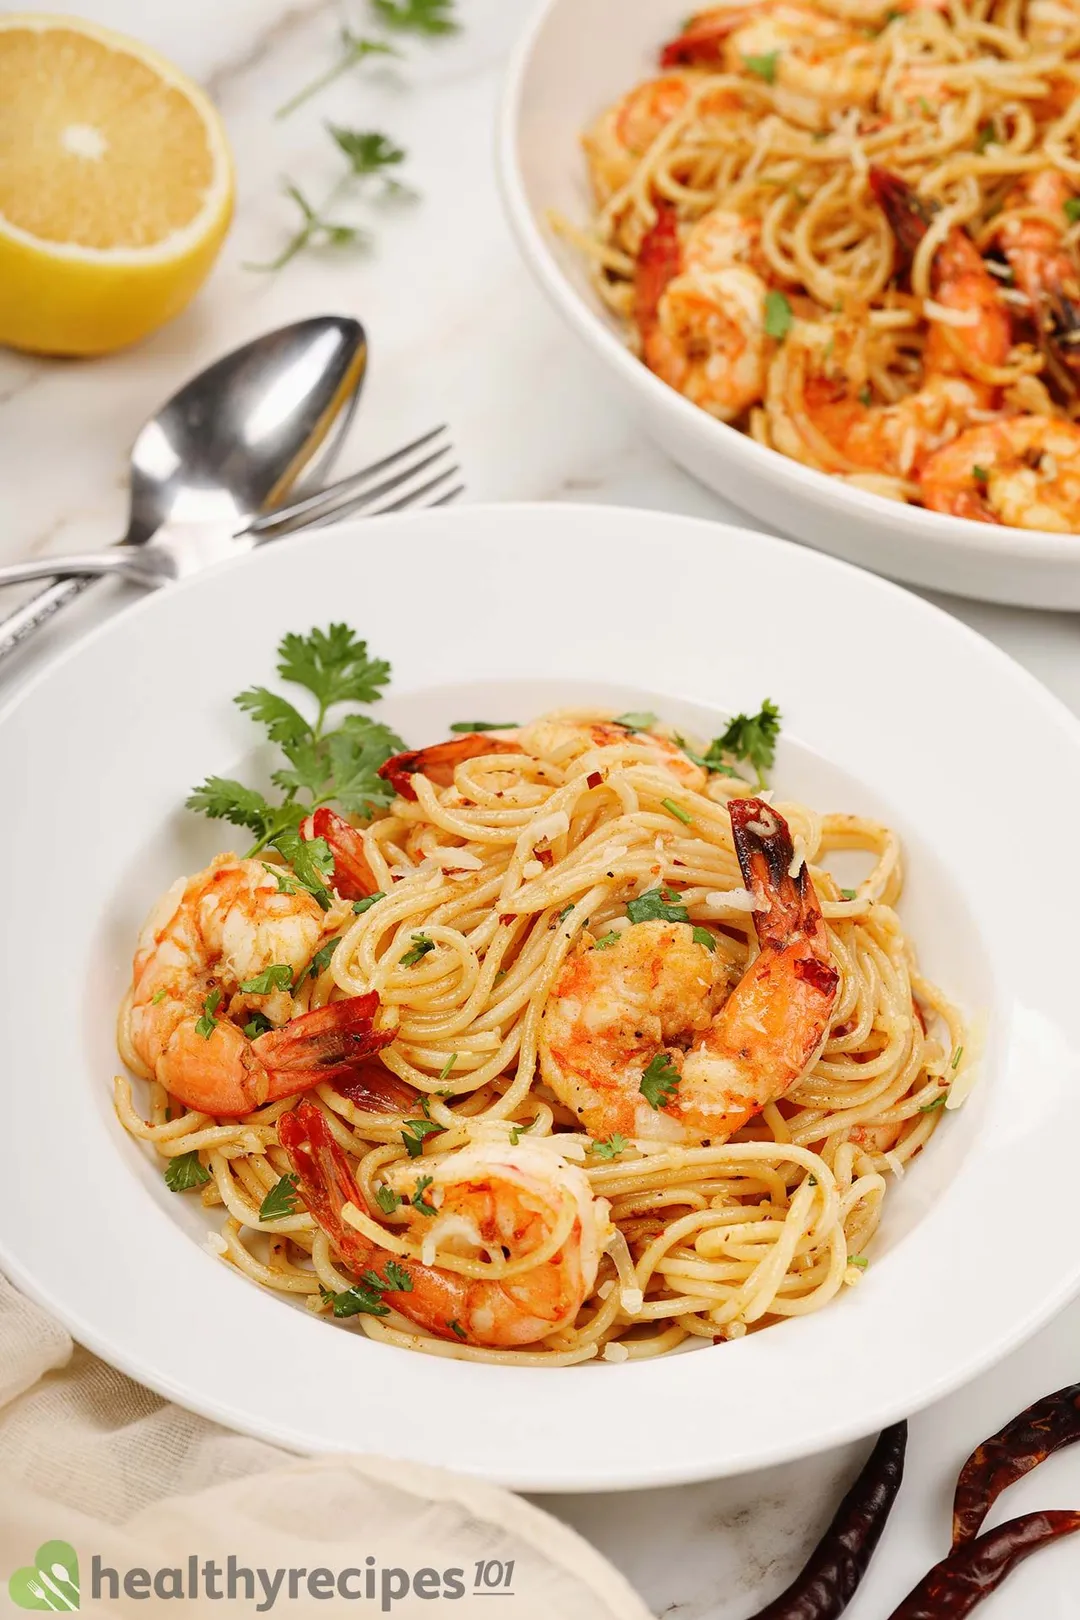 How to Store and Reheat Leftover Shrimp Pasta